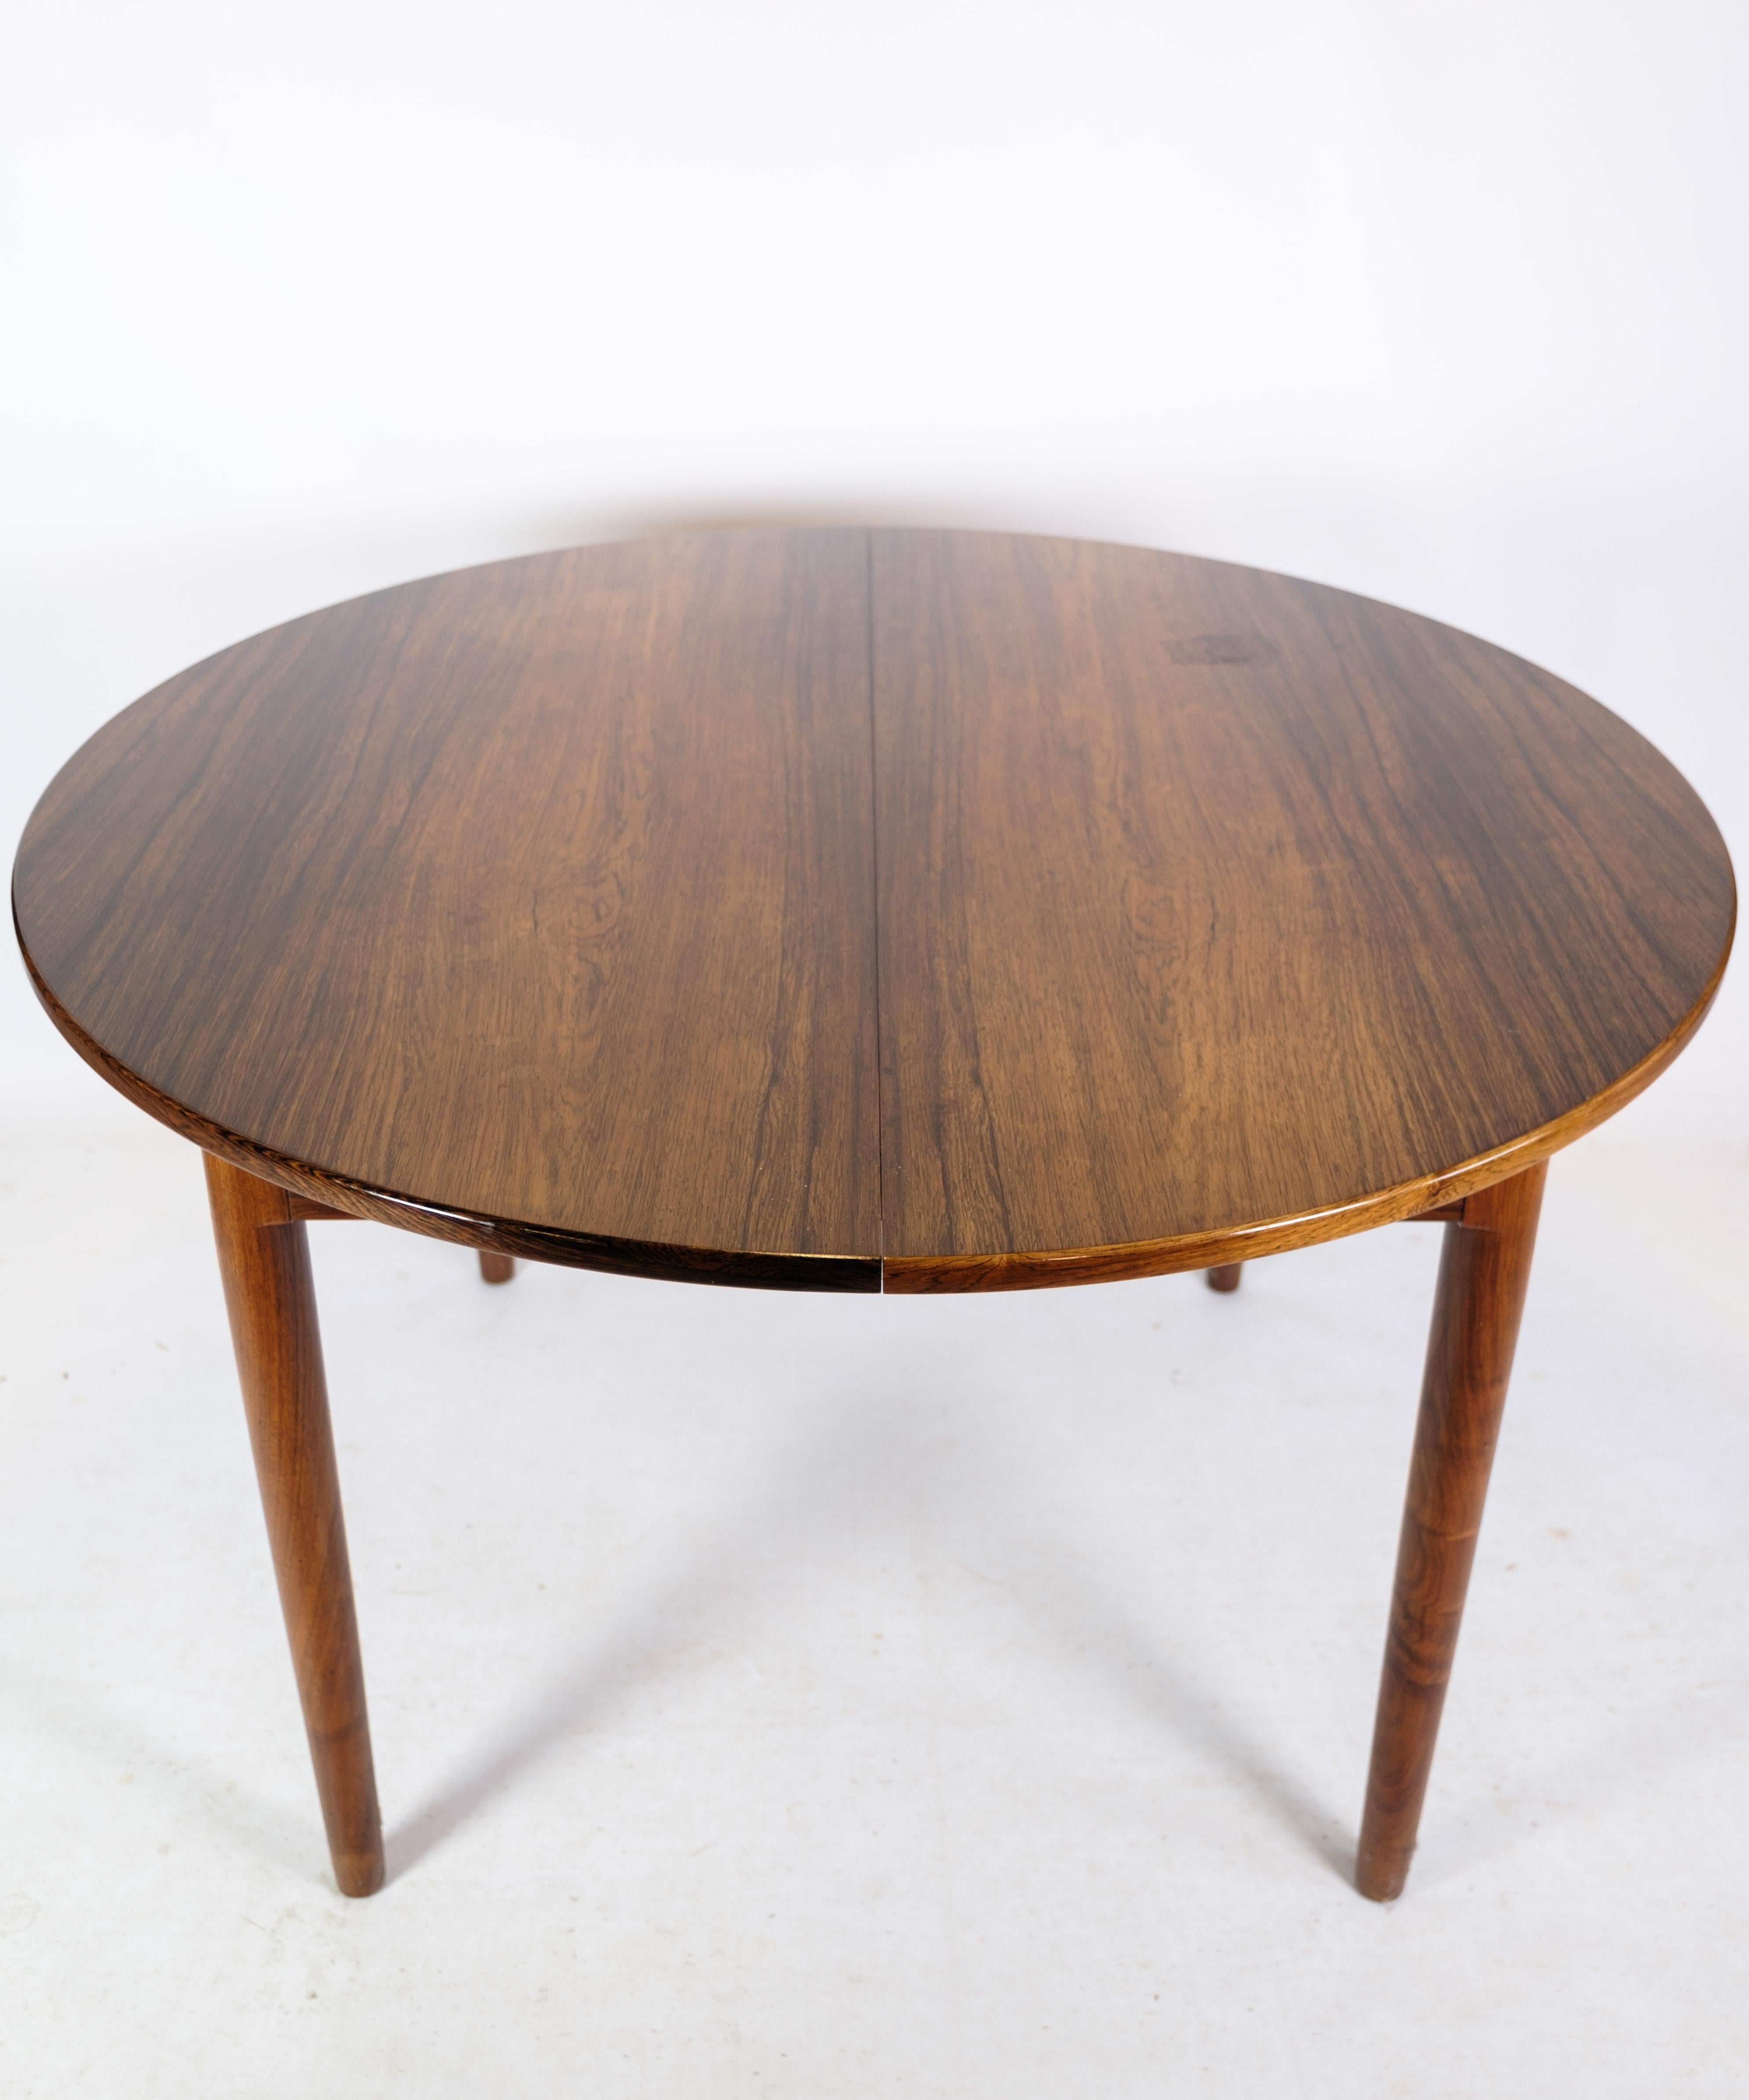 Teak dining table with built-in additional plate and round legs of Danish design from around the 1960s. Small Stain of the top plate can be repaired in our professional workshop just send us a message. 

Measurements in cm: H:73 Dia: 120
Pull-out